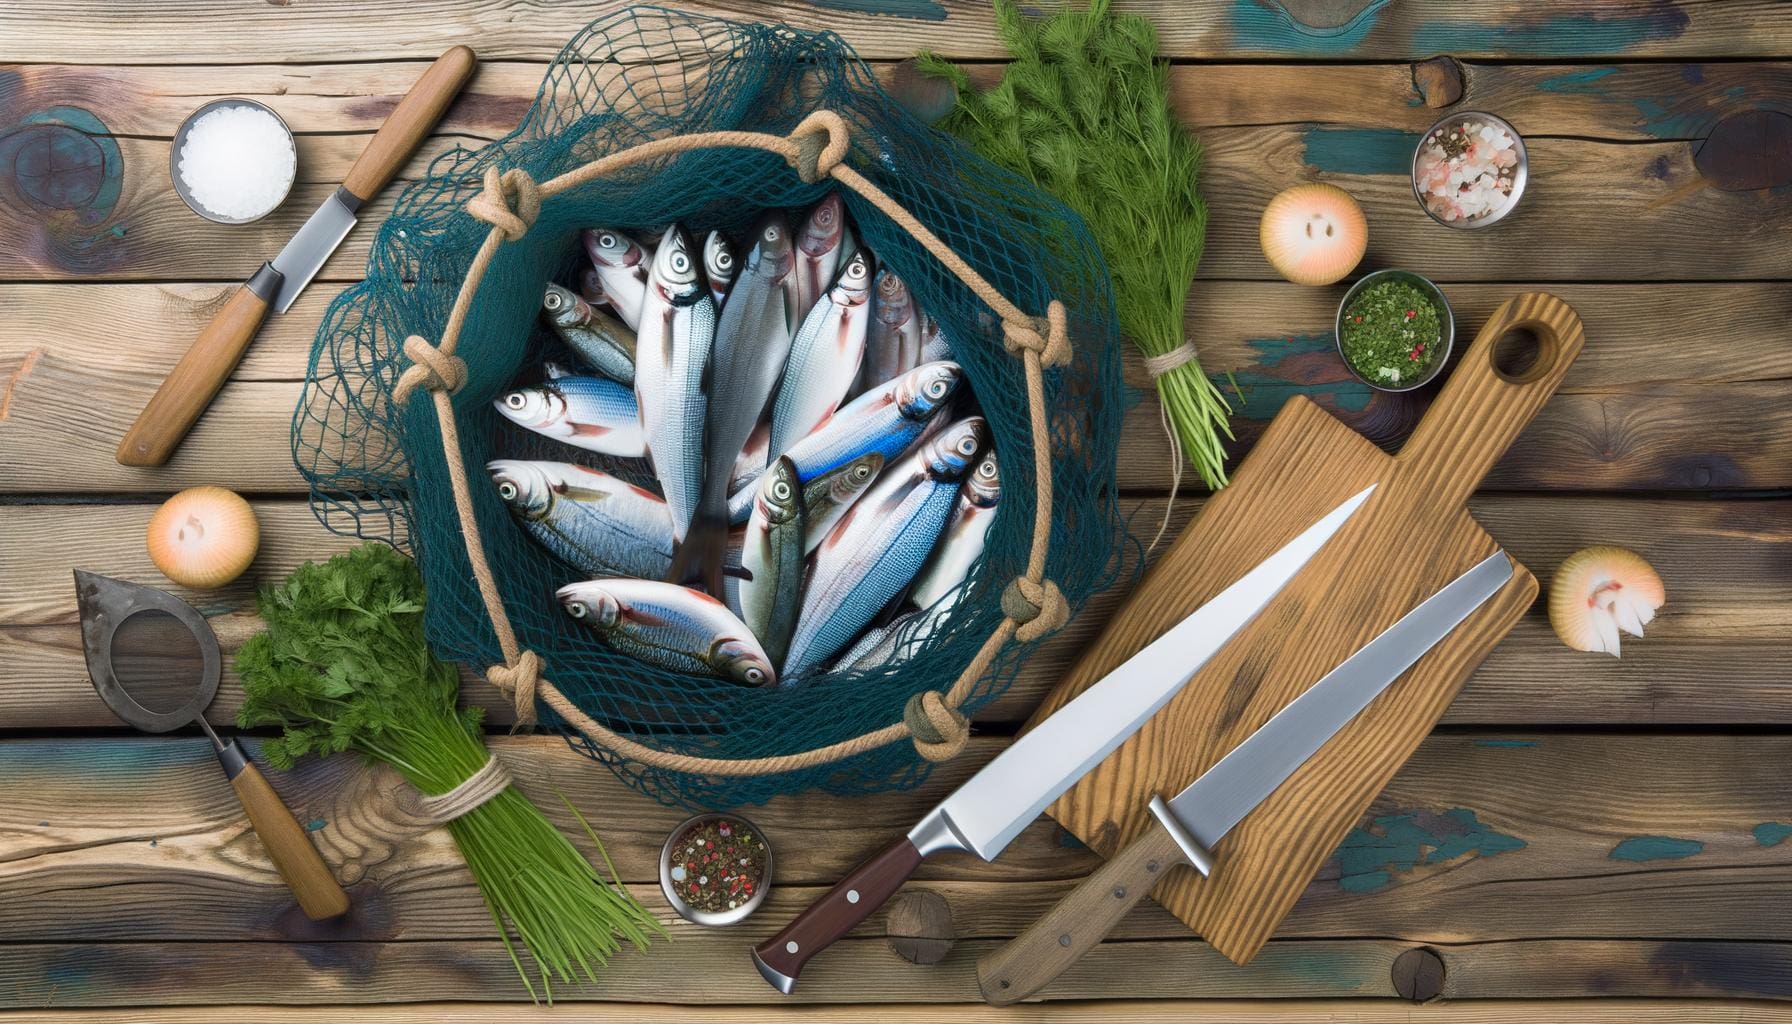 Preparing Your Catch: Essential Cleaning & Cooking Tips